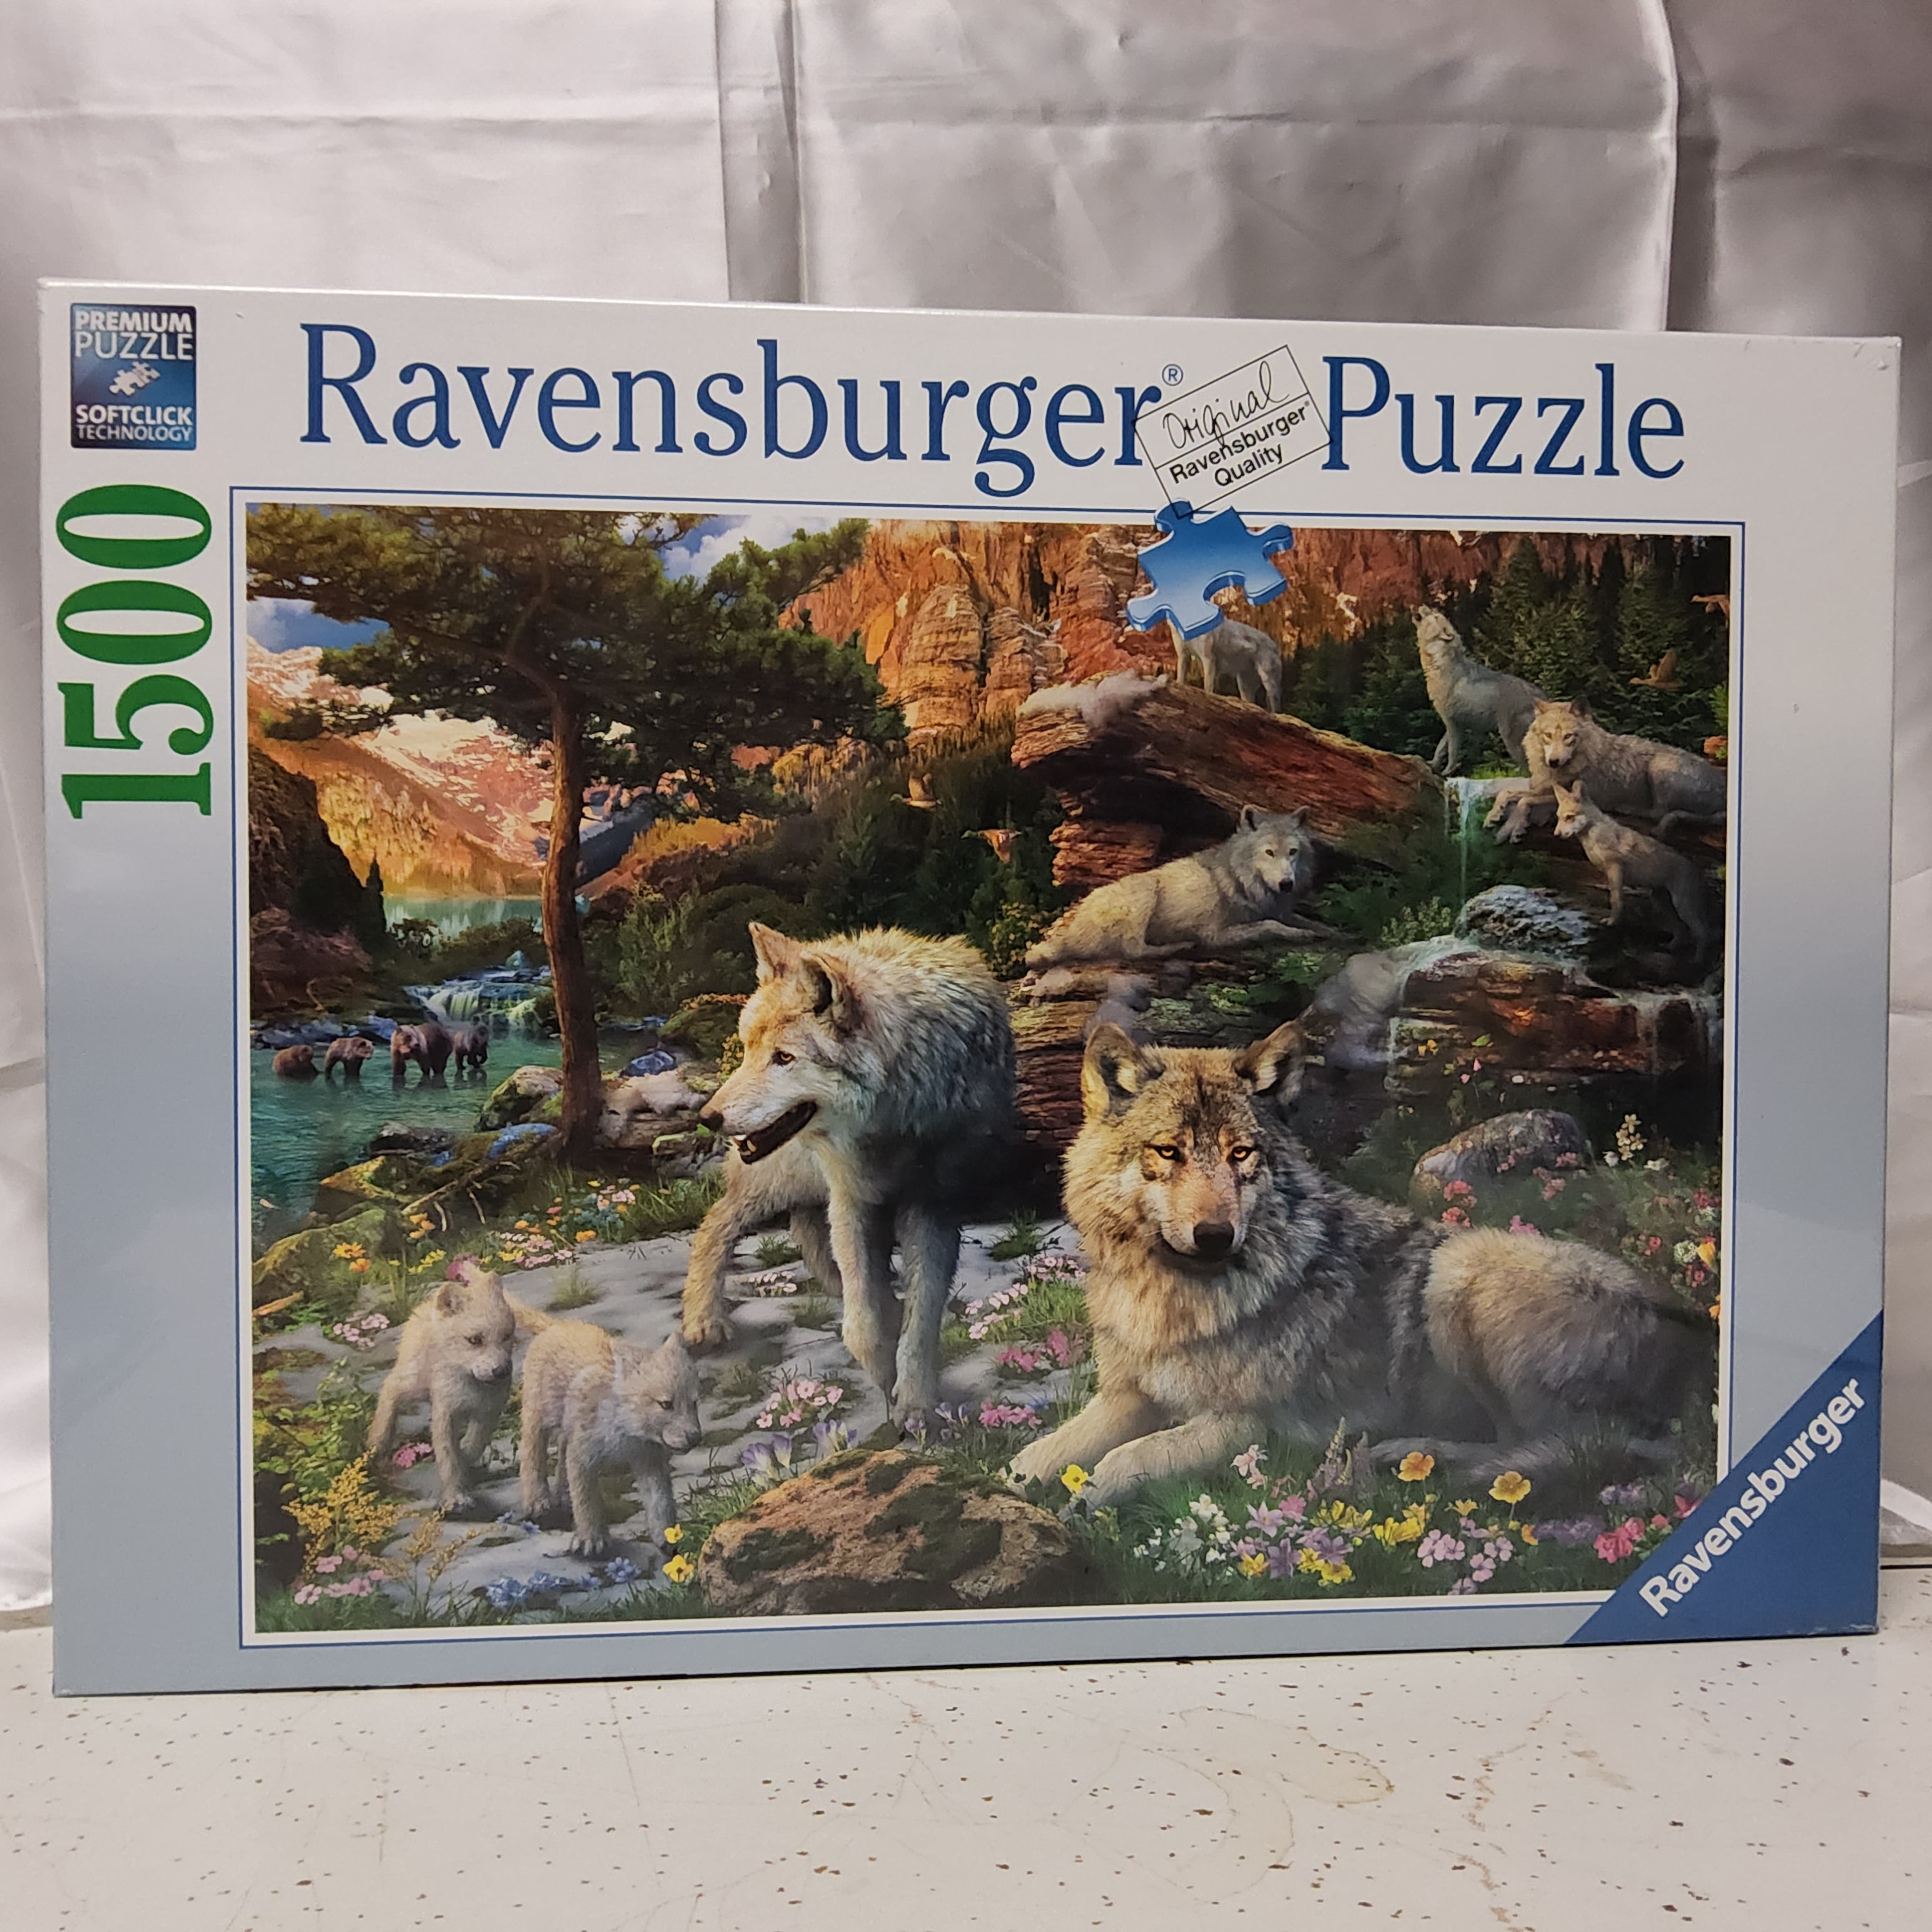 Ravensburger Puzzle - Wolves in Spring - 1500 pieces - #16598